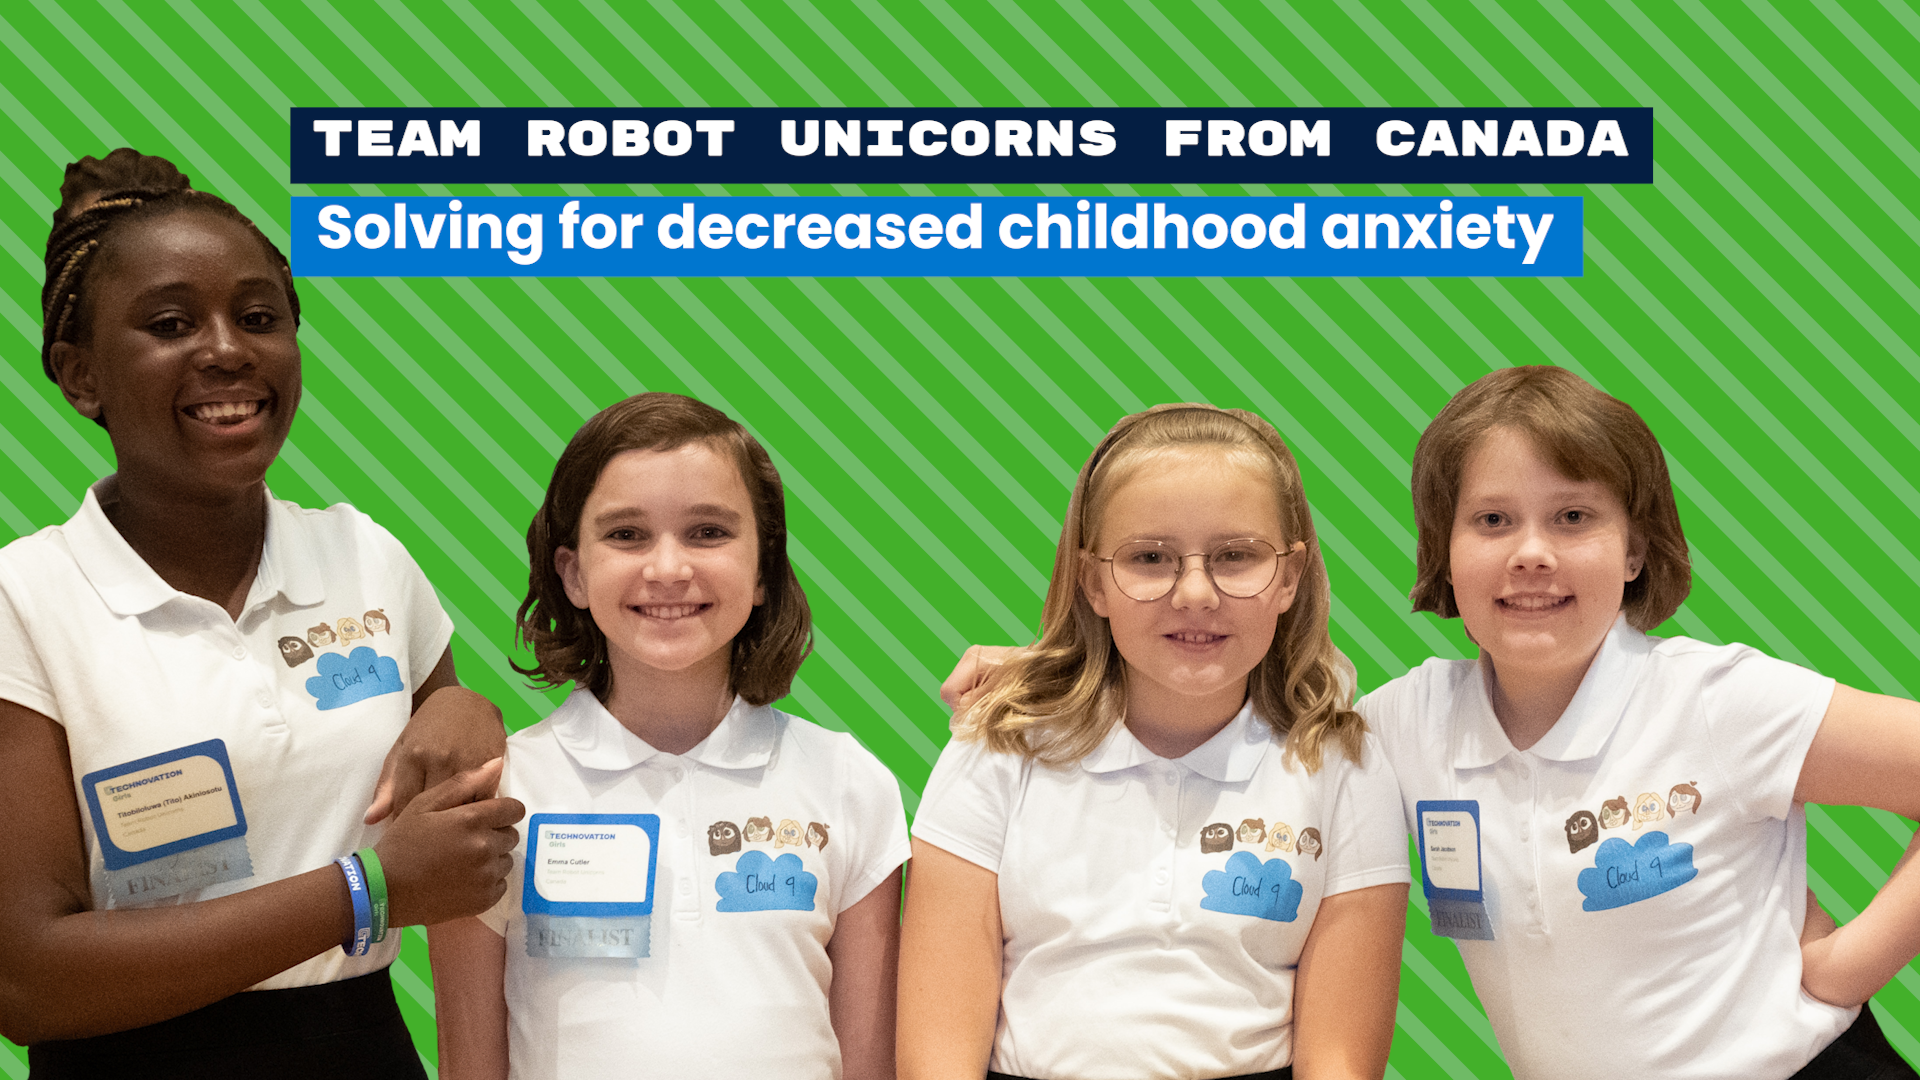 Technovation: Robot Unicorns - four 11 year-old girls in white polos smile and post; image on a bright greeen background